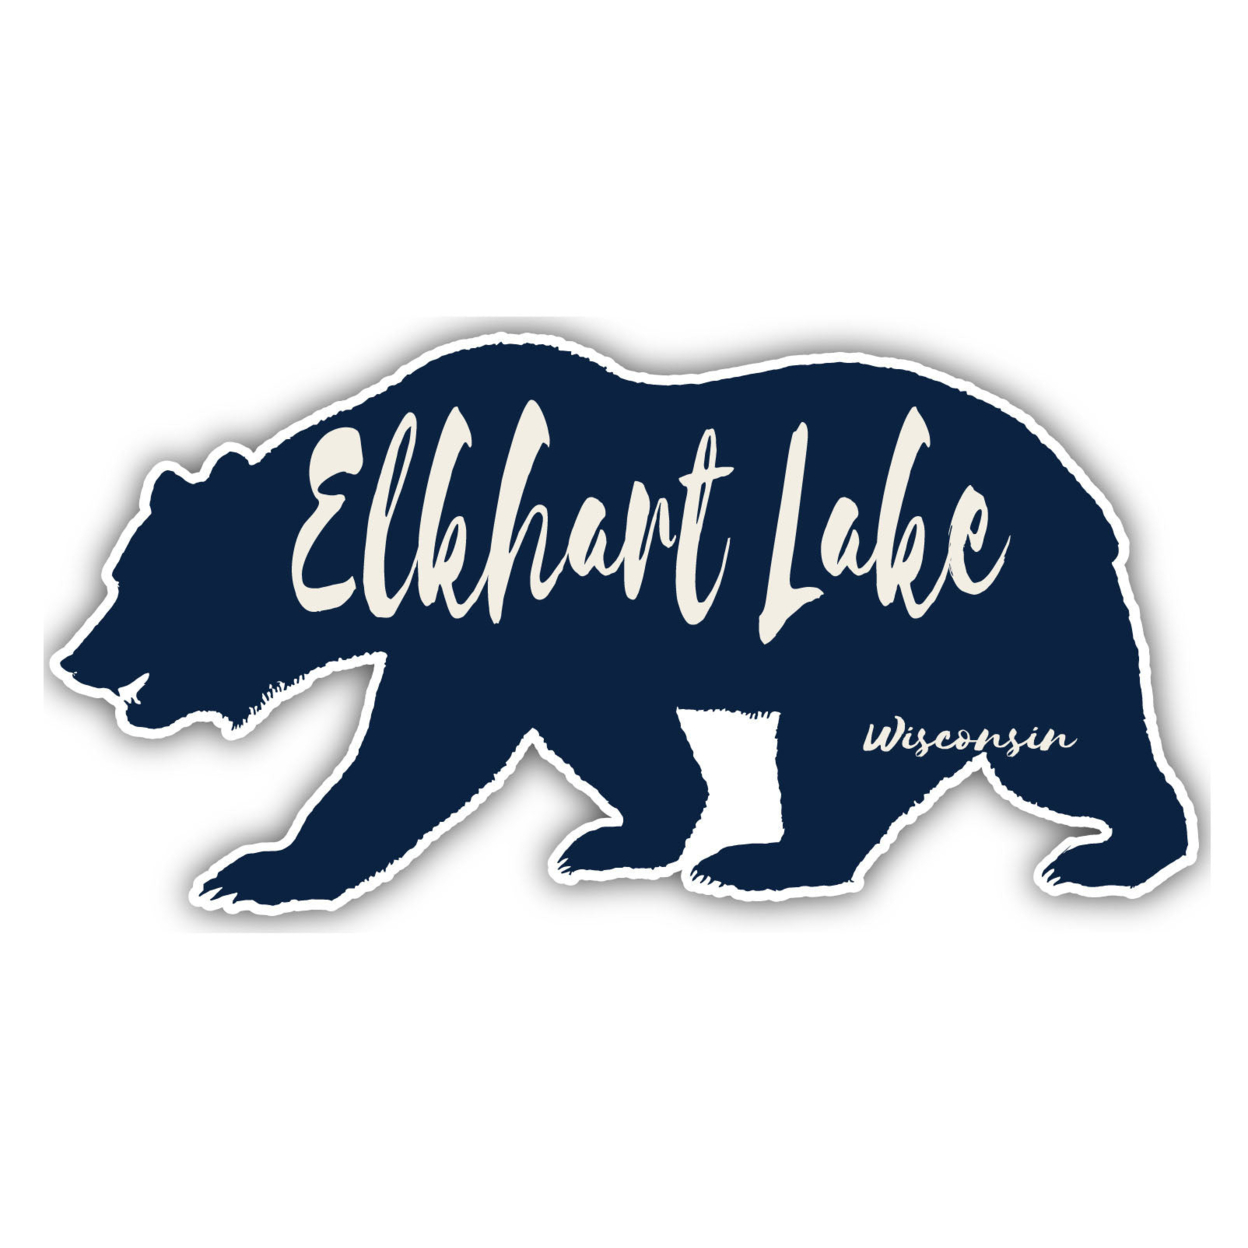 Elkhart Lake Wisconsin Souvenir Decorative Stickers (Choose Theme And Size) - 4-Pack, 12-Inch, Bear